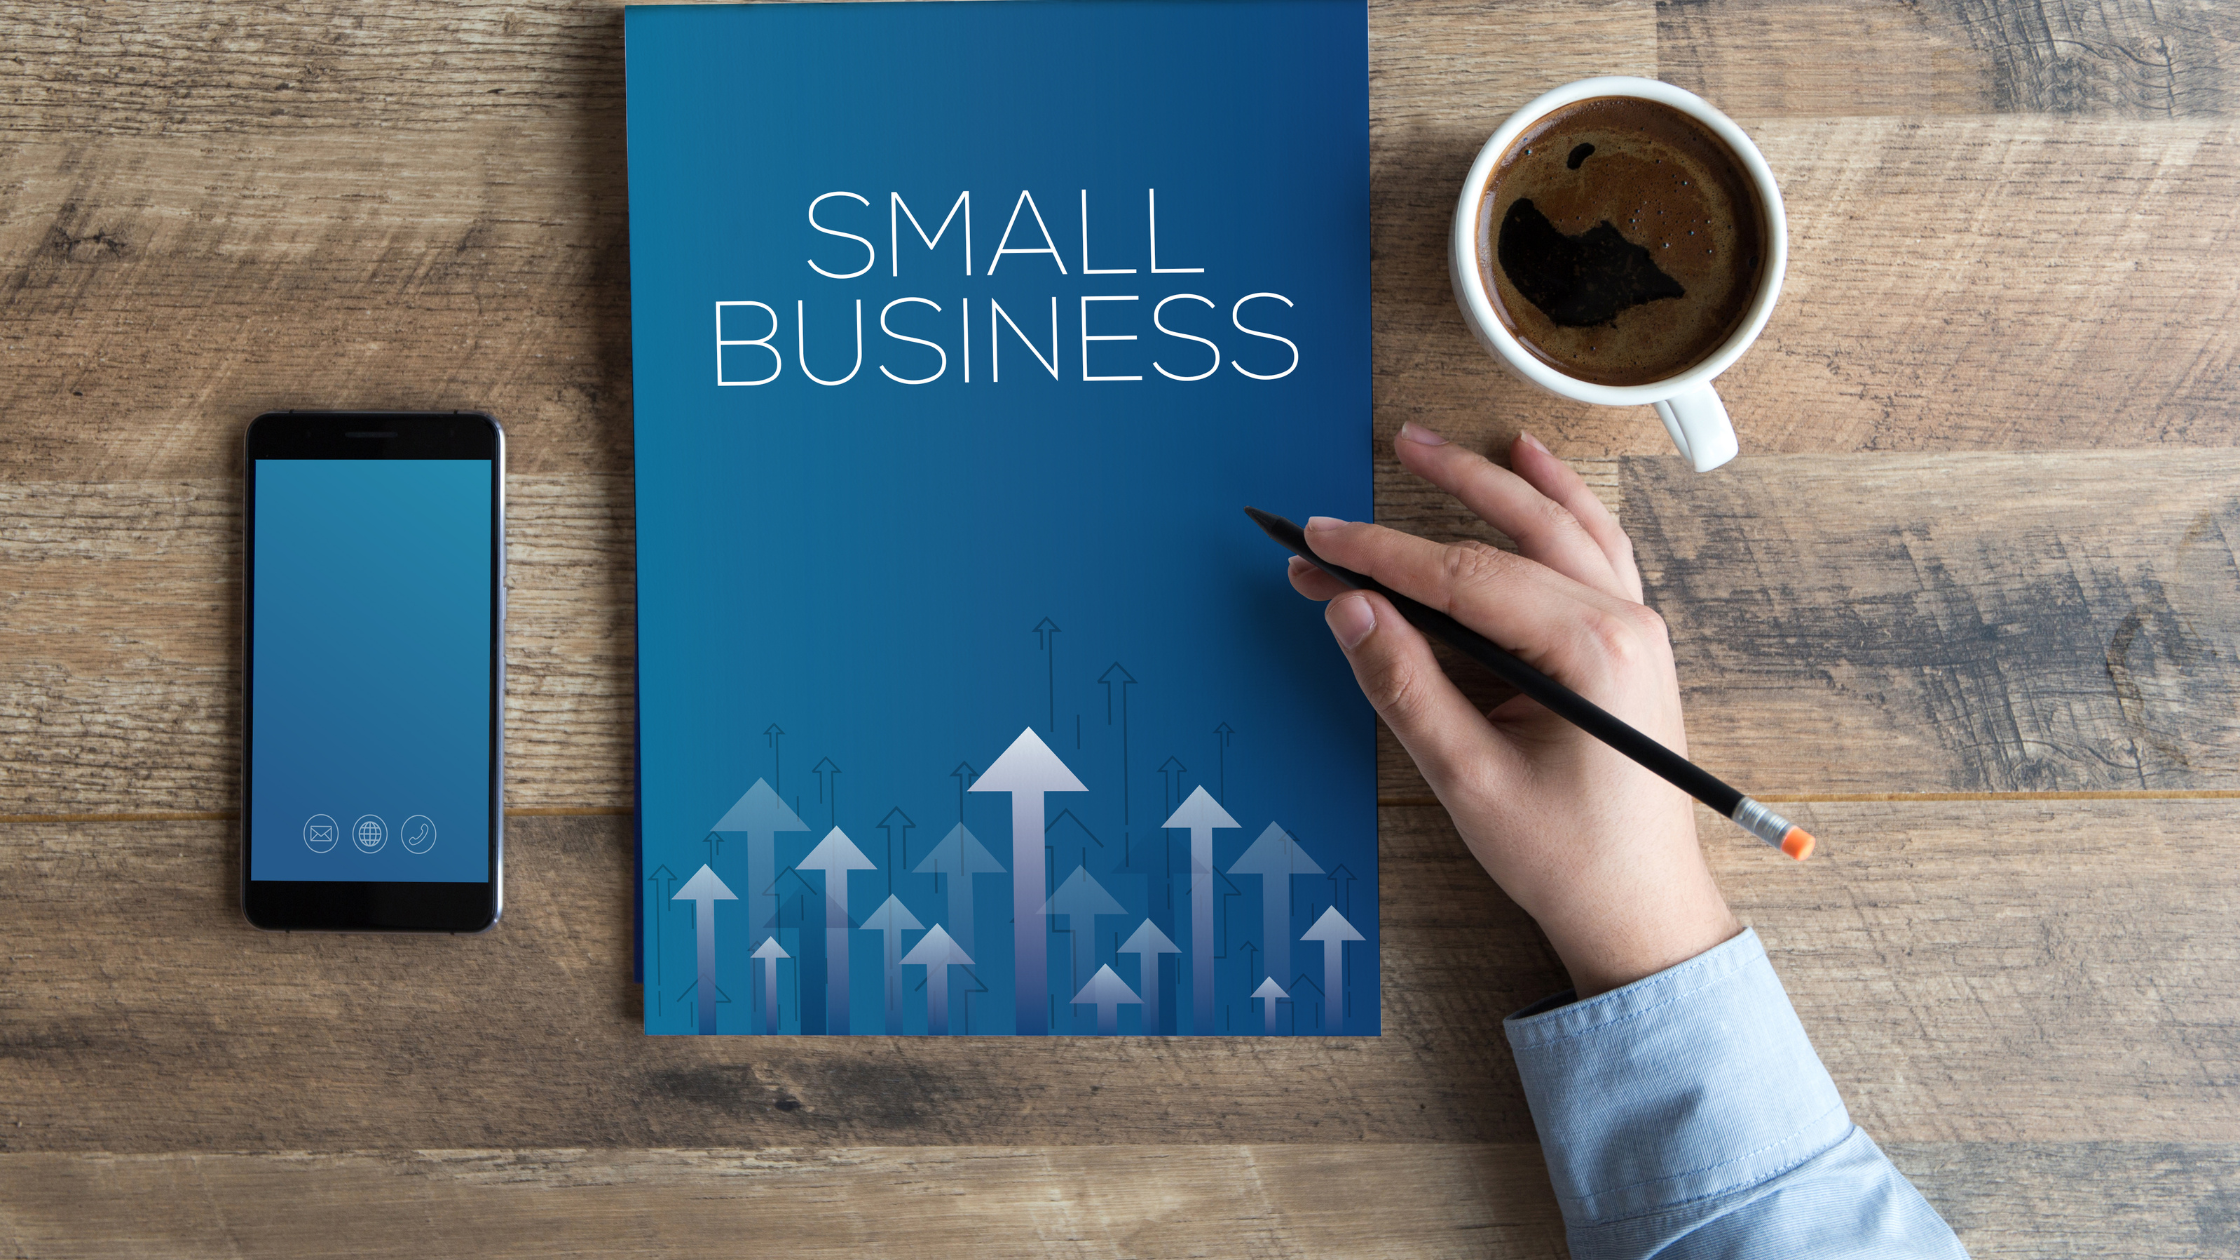 The Federal Trade Commission and Small Business Continuity